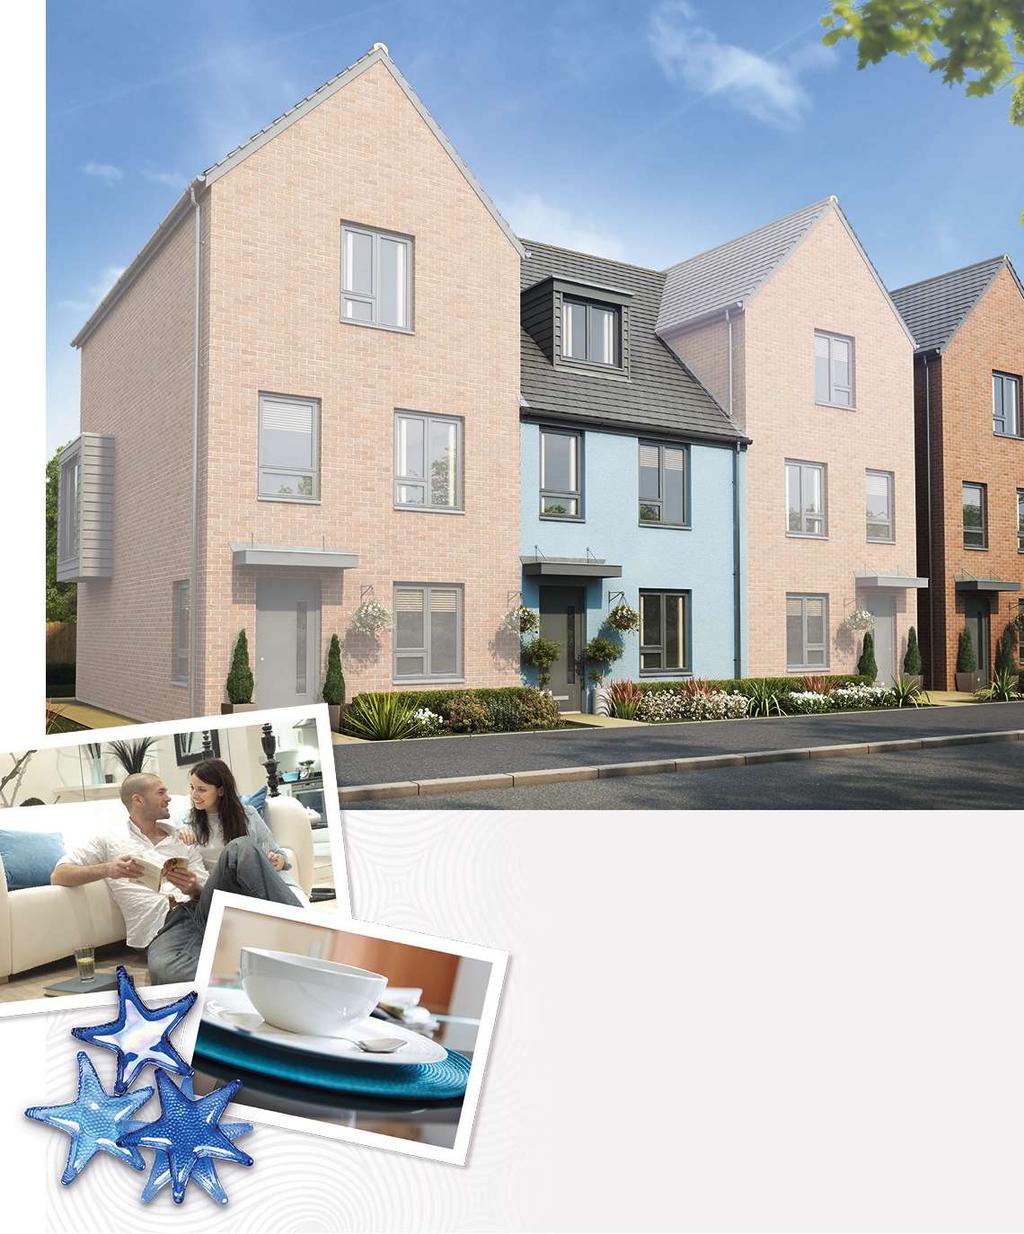 LATITUDE @ THE QUAYS The Alton G 3 bedroom home Cleverly laid out over 3 storeys, The Alton G offers flexible space ideal for today s lifestyles.